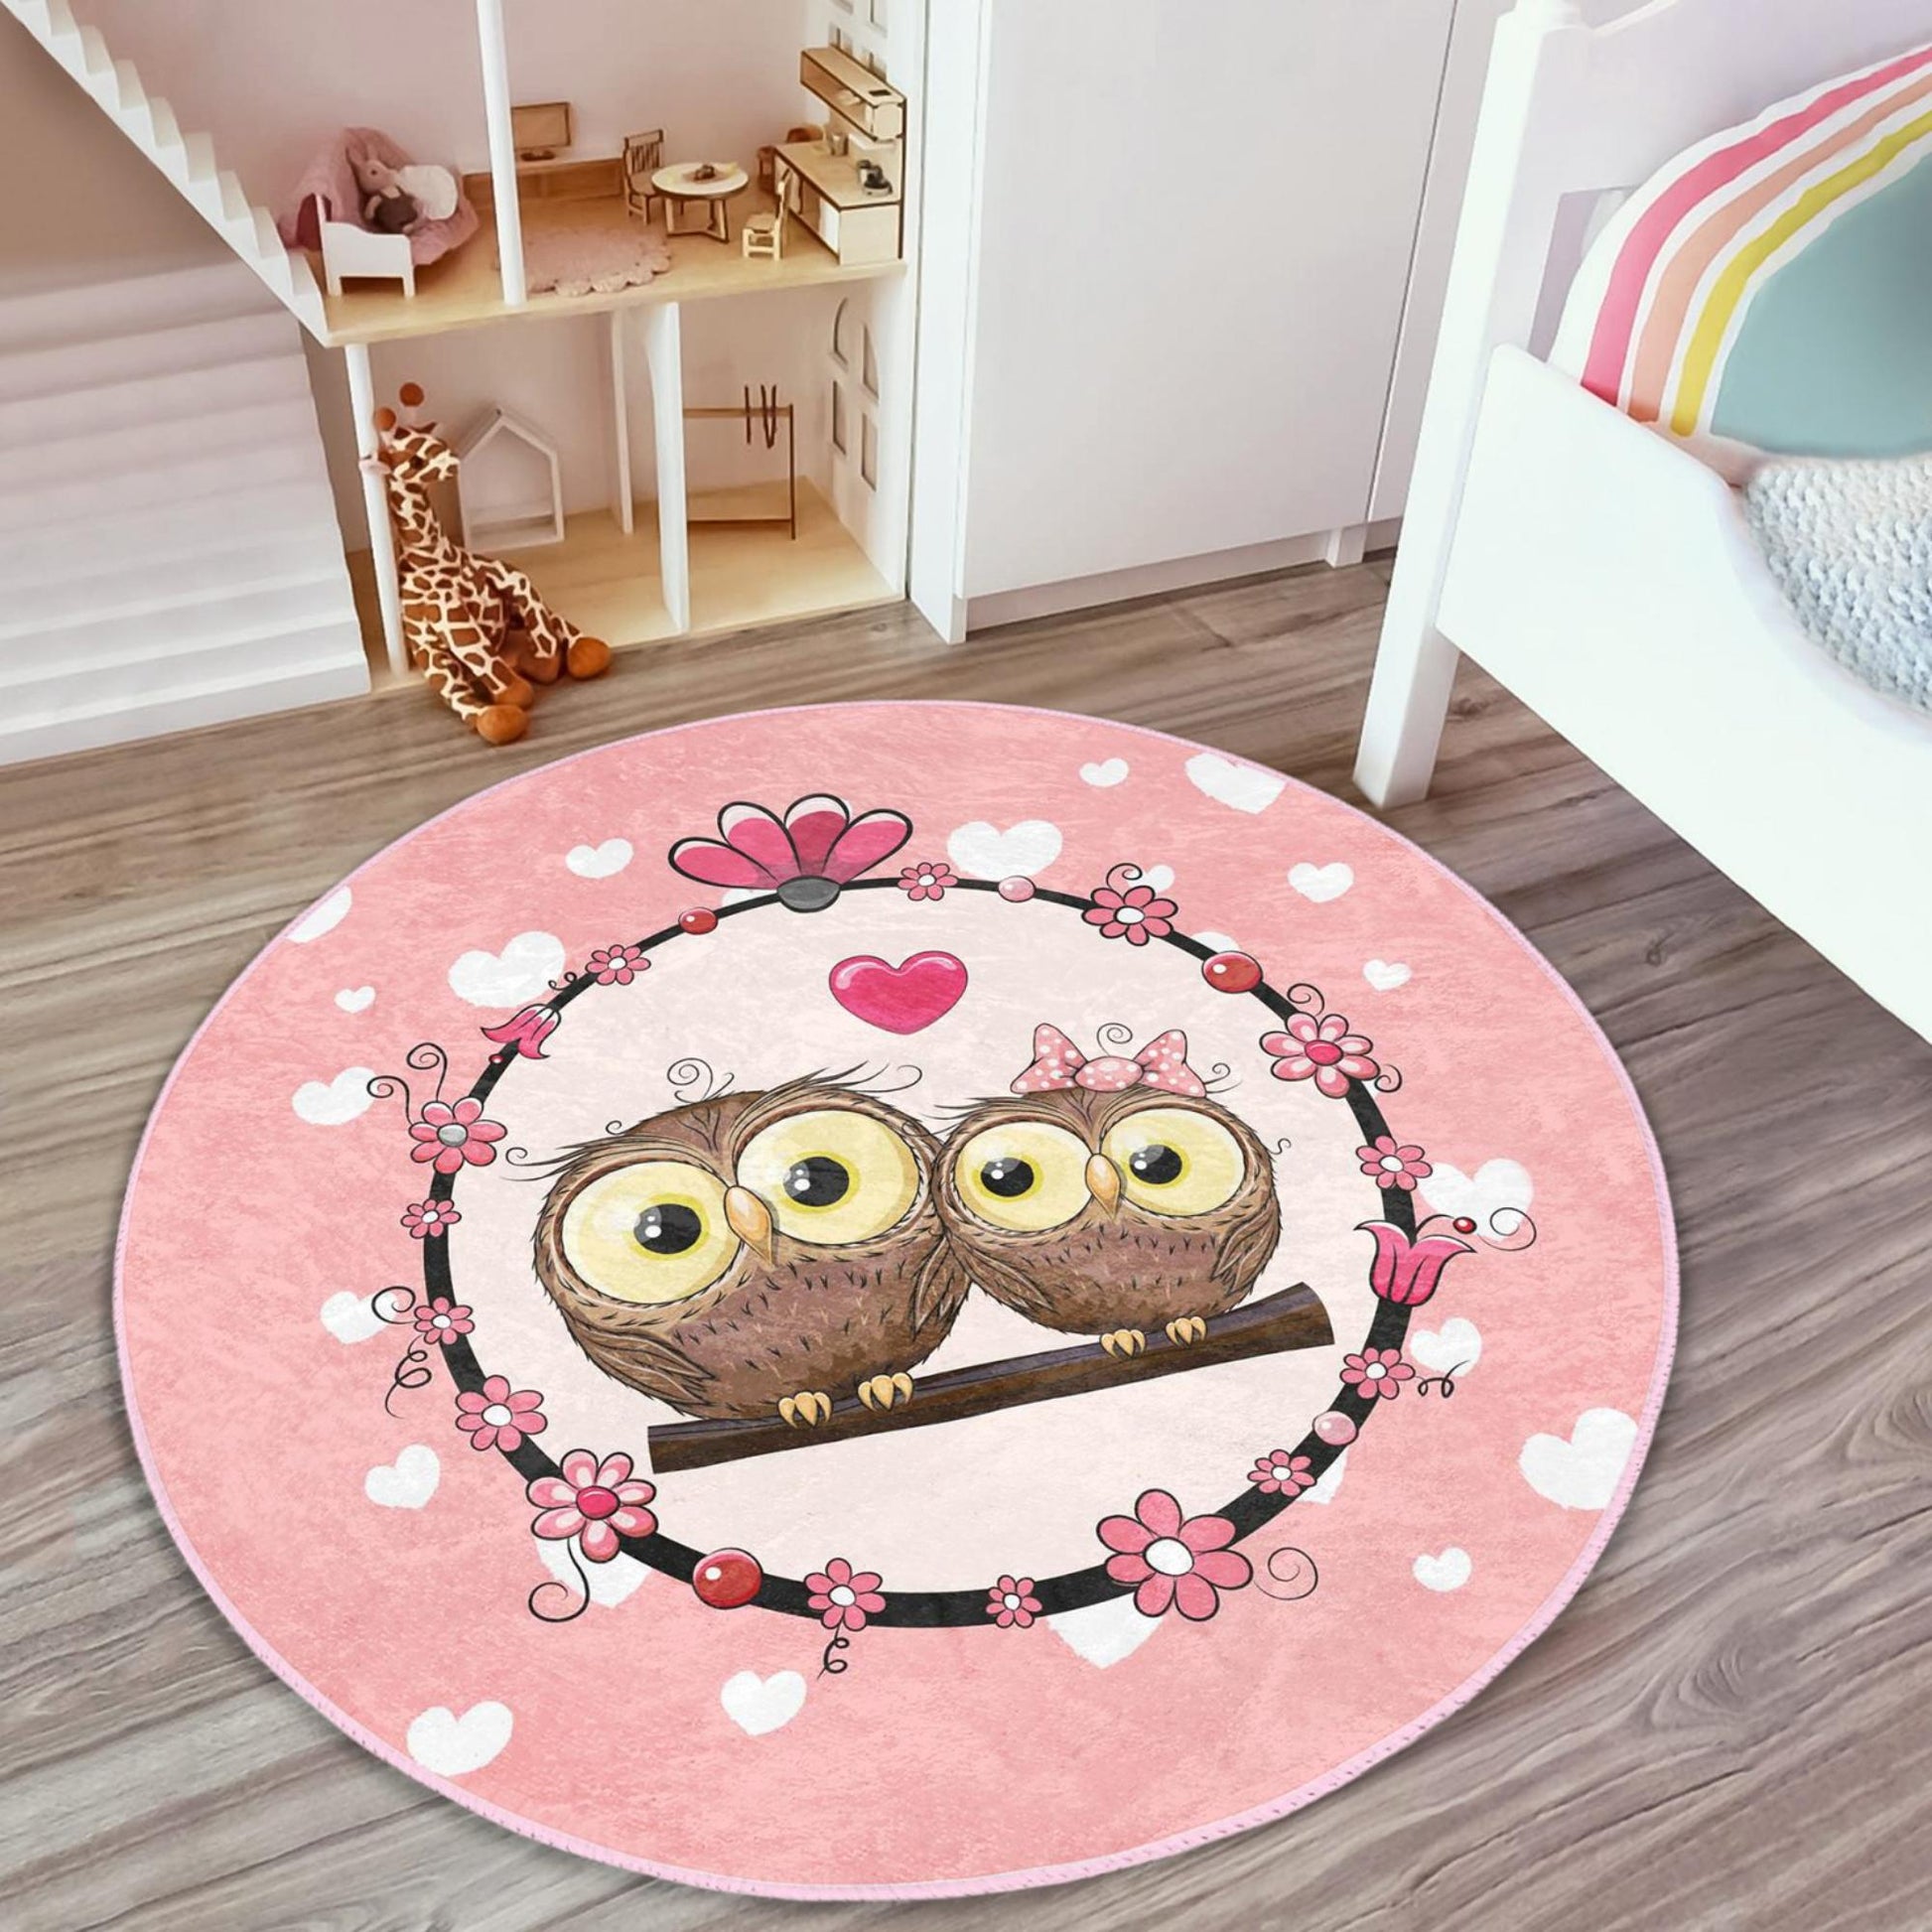 Sweet owl-themed rug with pink owl loves perfect for adding charm to kids' spaces.